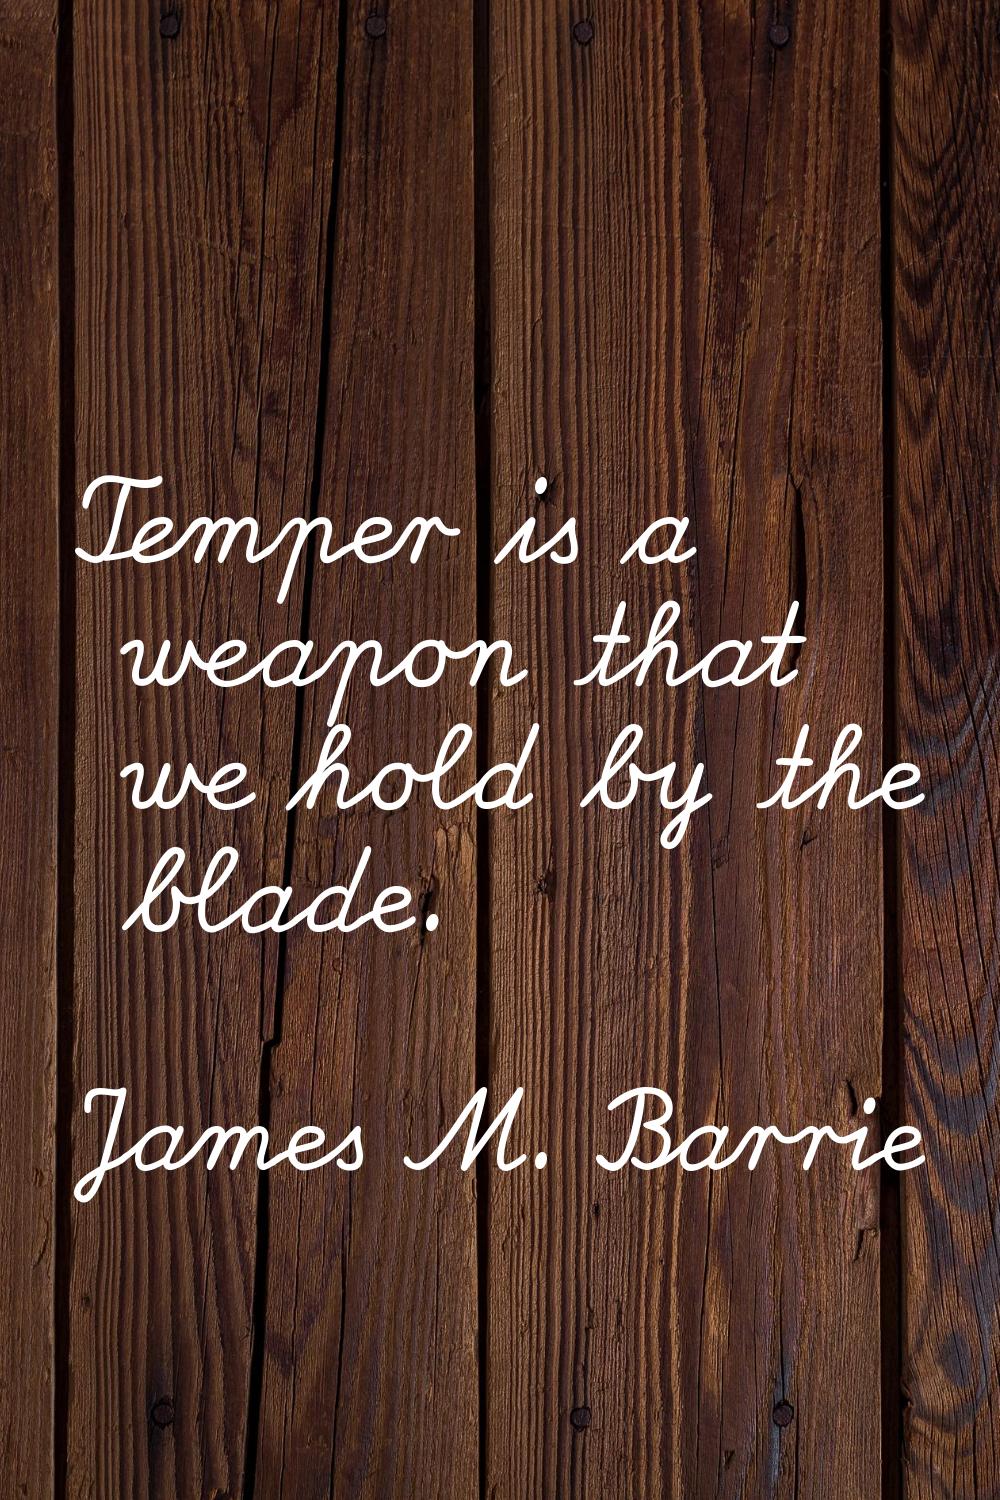 Temper is a weapon that we hold by the blade.